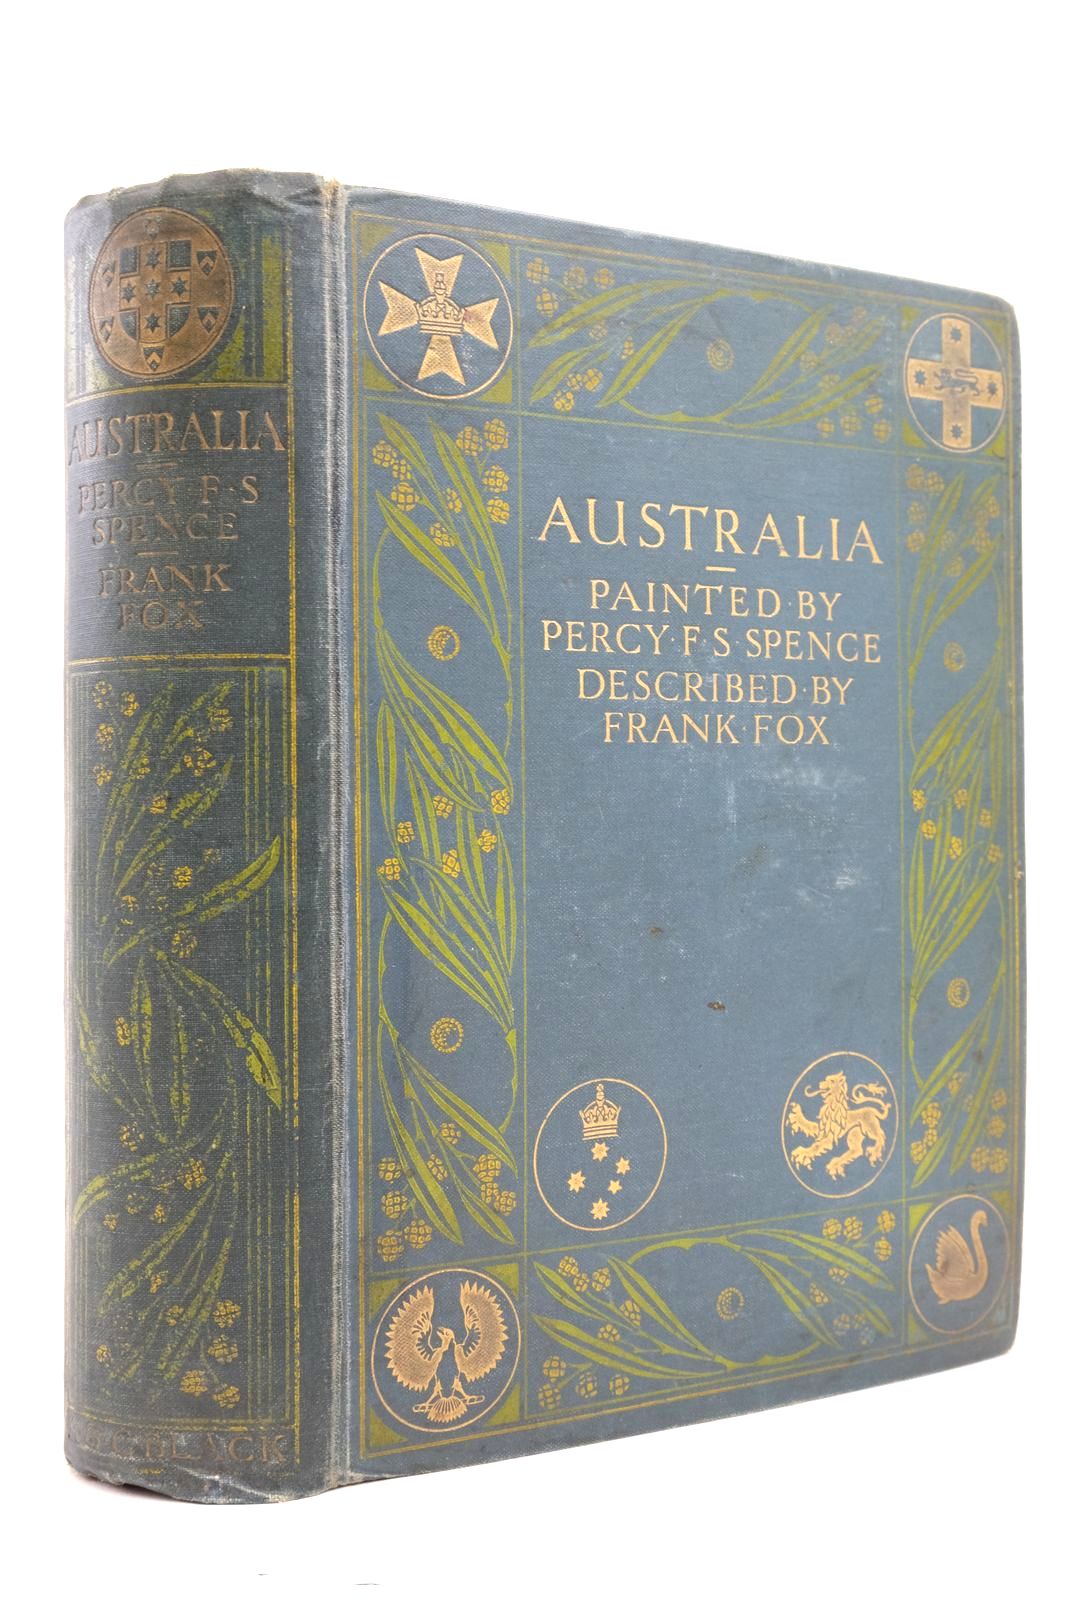 Photo of AUSTRALIA written by Fox, Frank illustrated by Spence, Percy F.S. published by Adam & Charles Black (STOCK CODE: 2137168)  for sale by Stella & Rose's Books